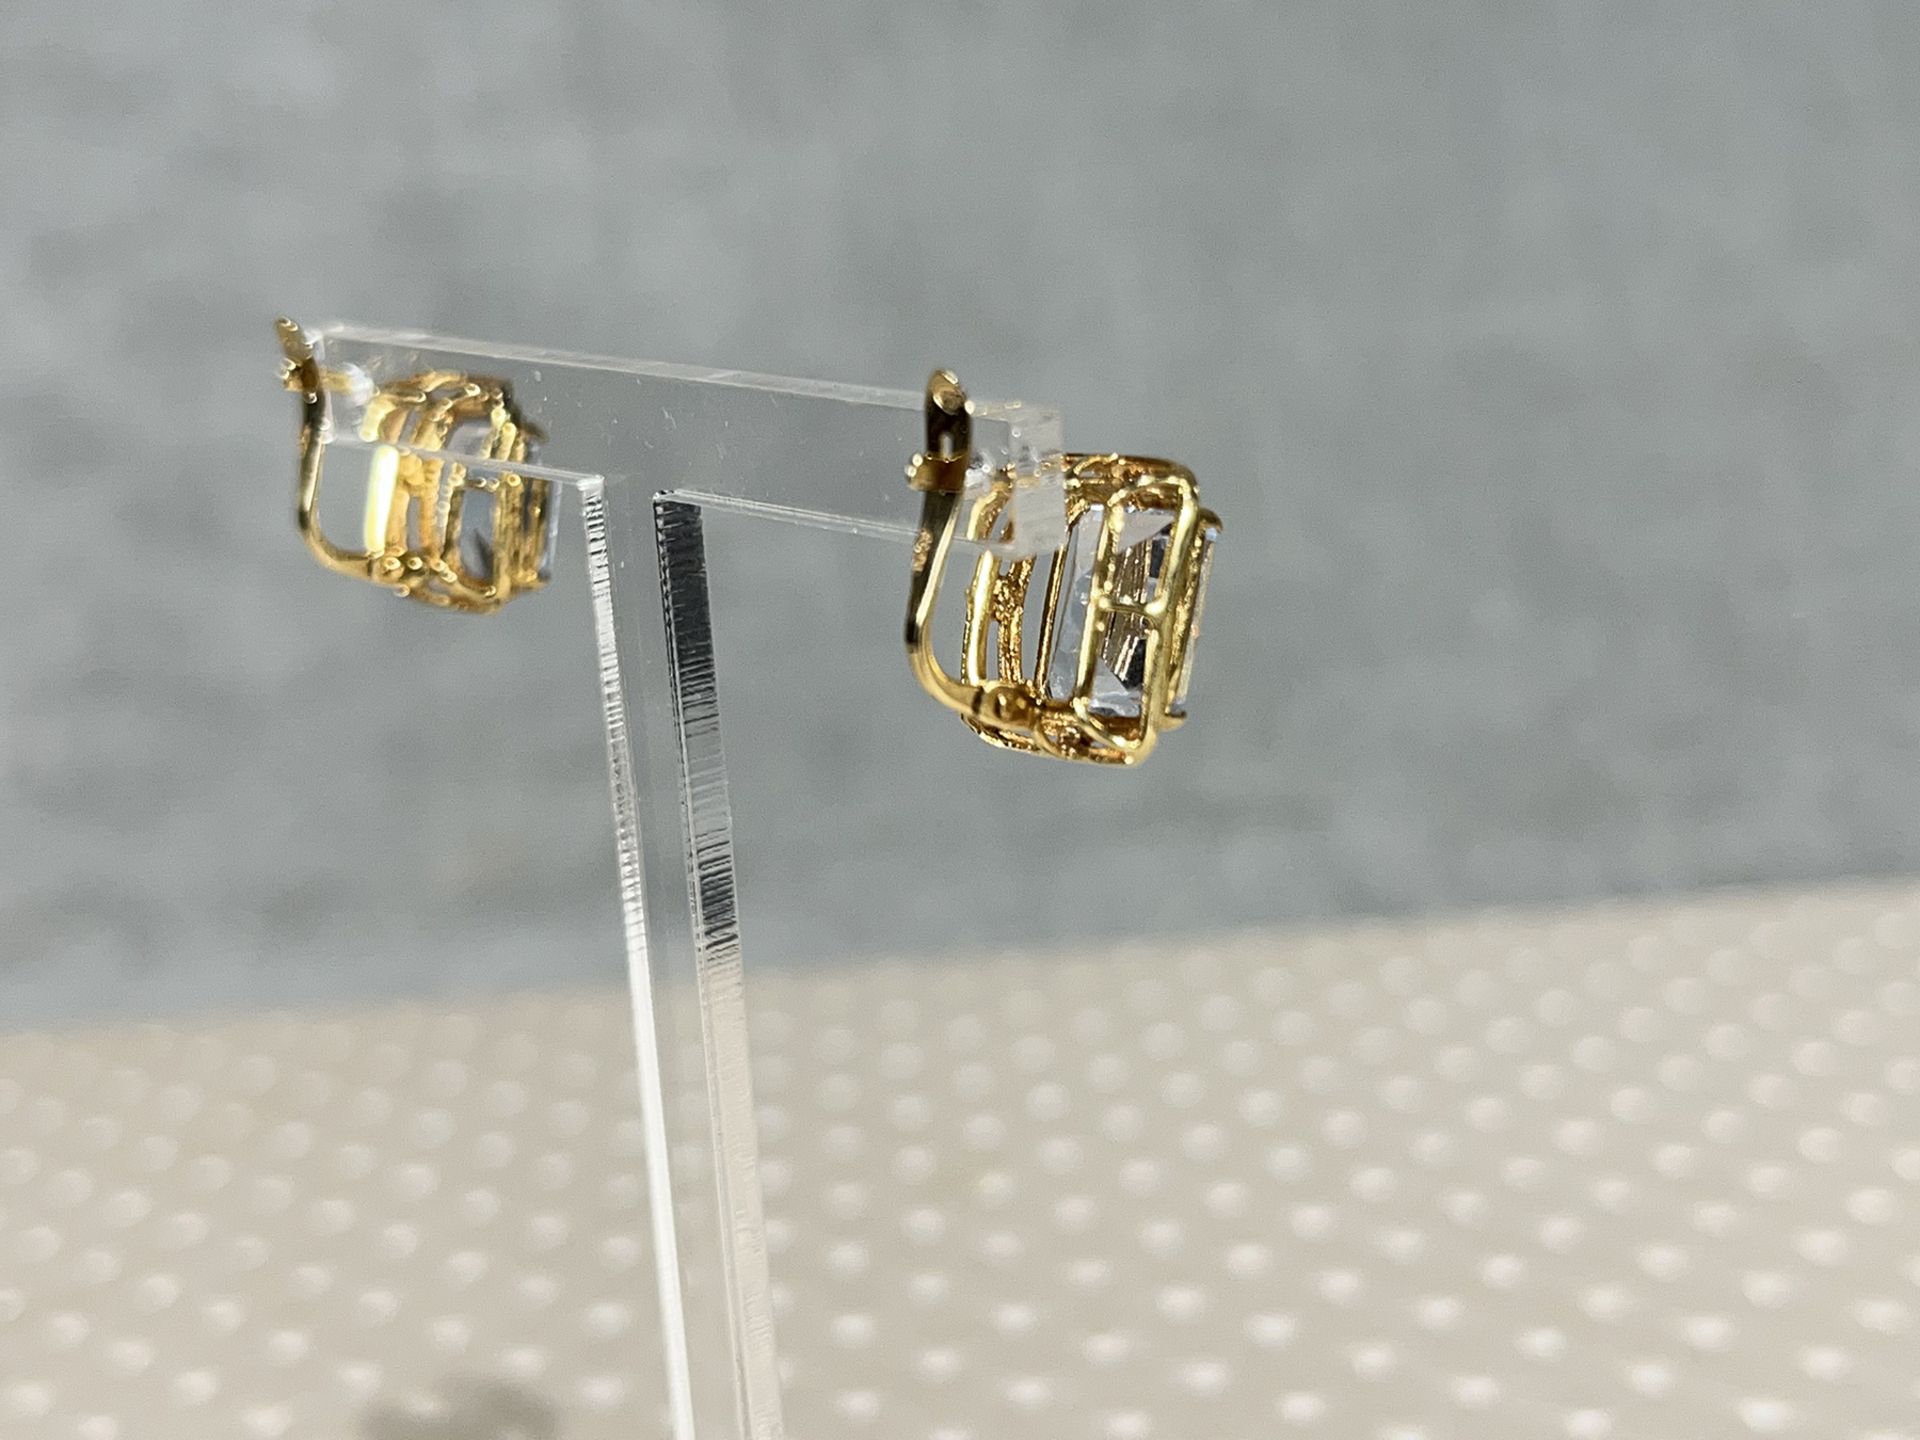 18k gold and topaz earrings - Image 2 of 6